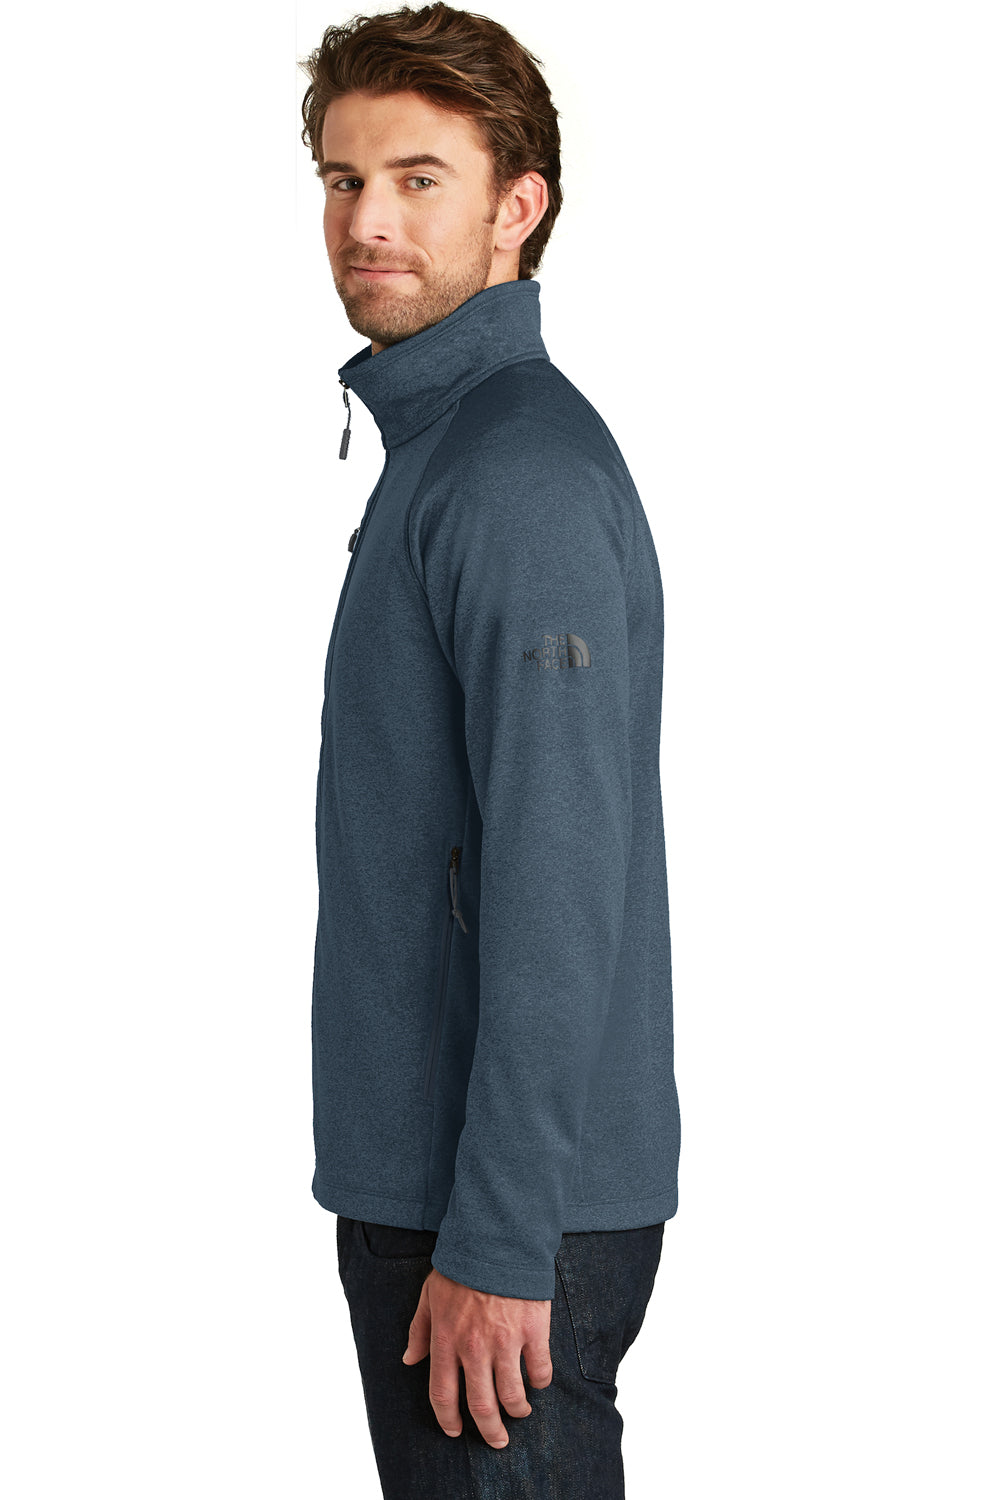 The North Face NF0A3LH9 Mens Canyon Flats Full Zip Fleece Jacket Heather Navy Blue Side